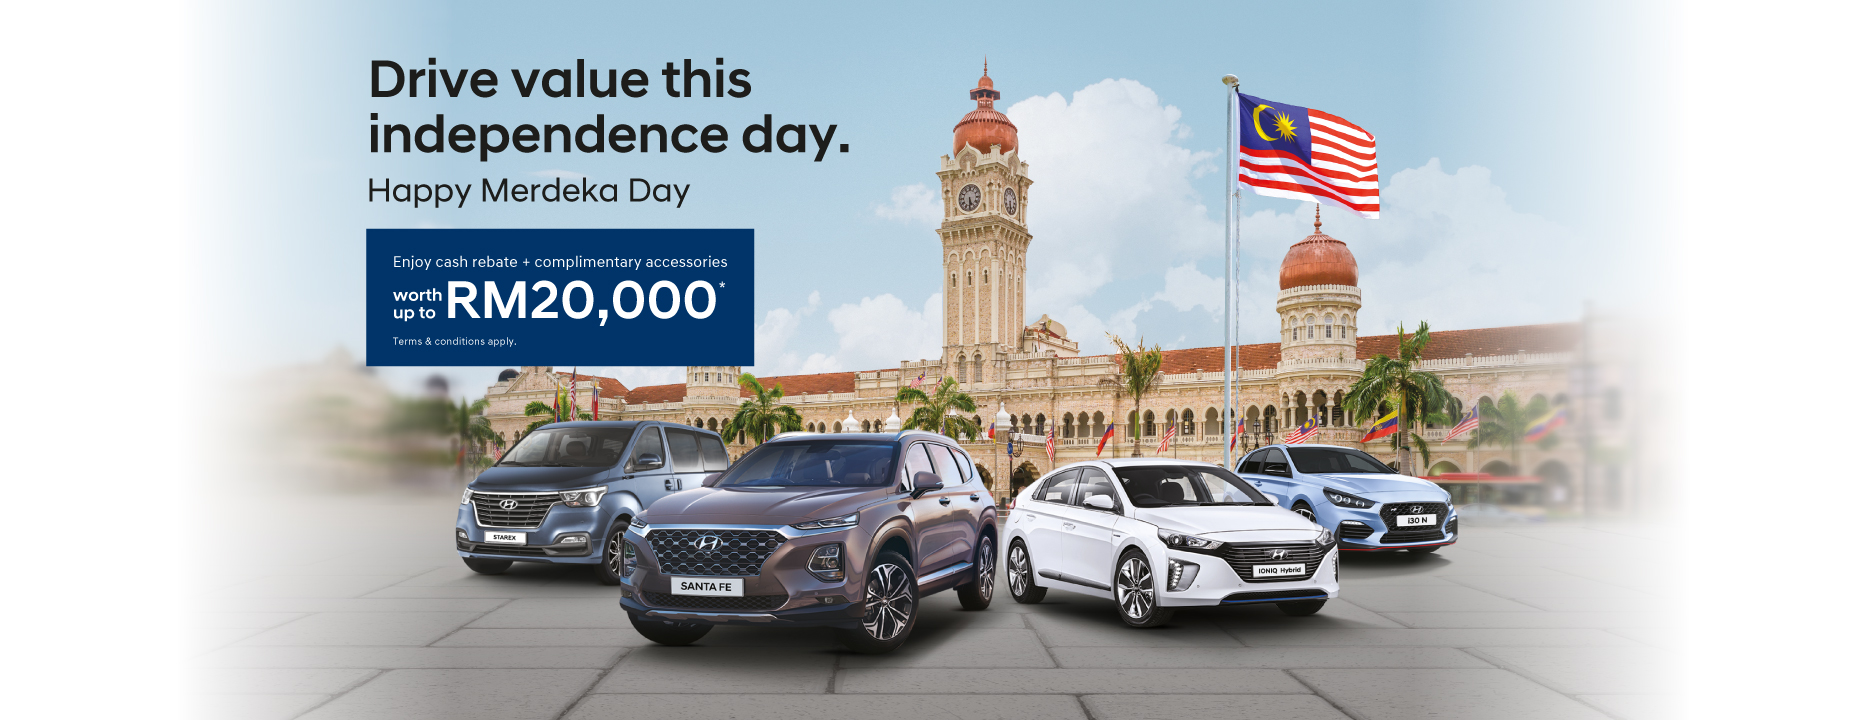 Drive value this independence day